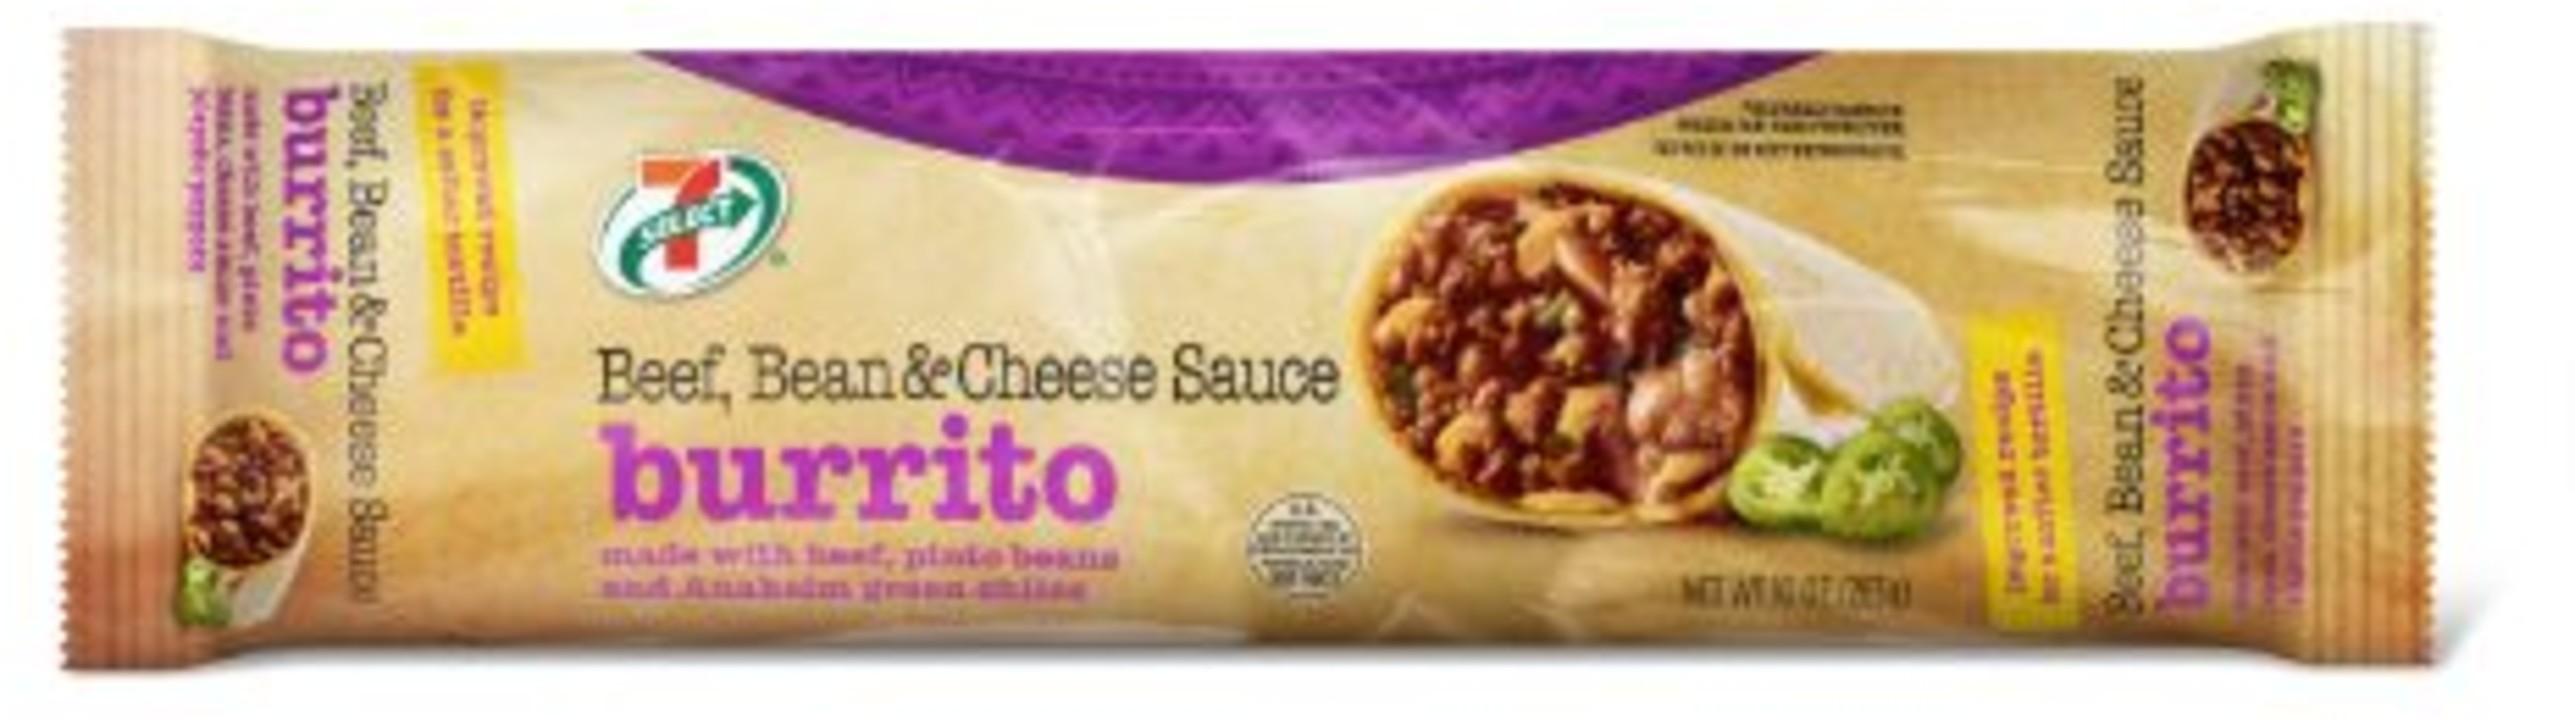 7-Select Burrito Beef Bean And Cheese